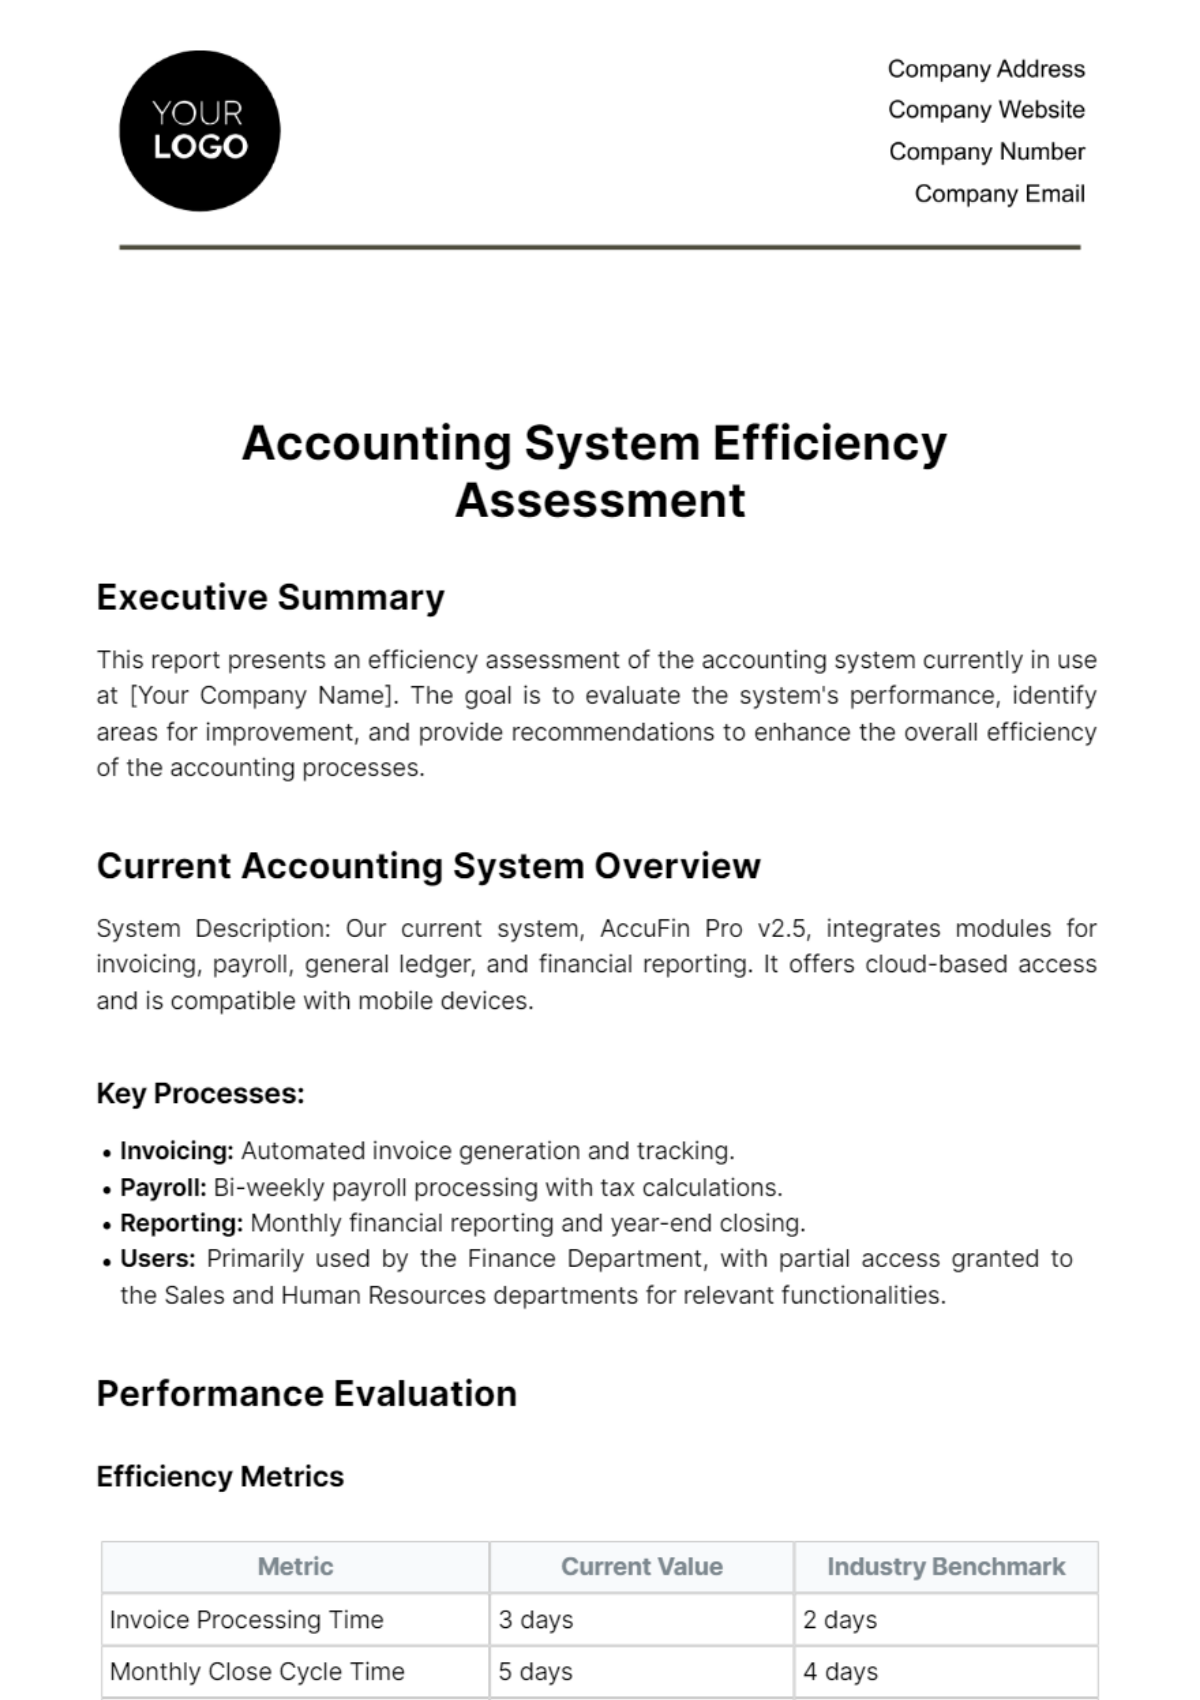 Accounting System Efficiency Assessment Template